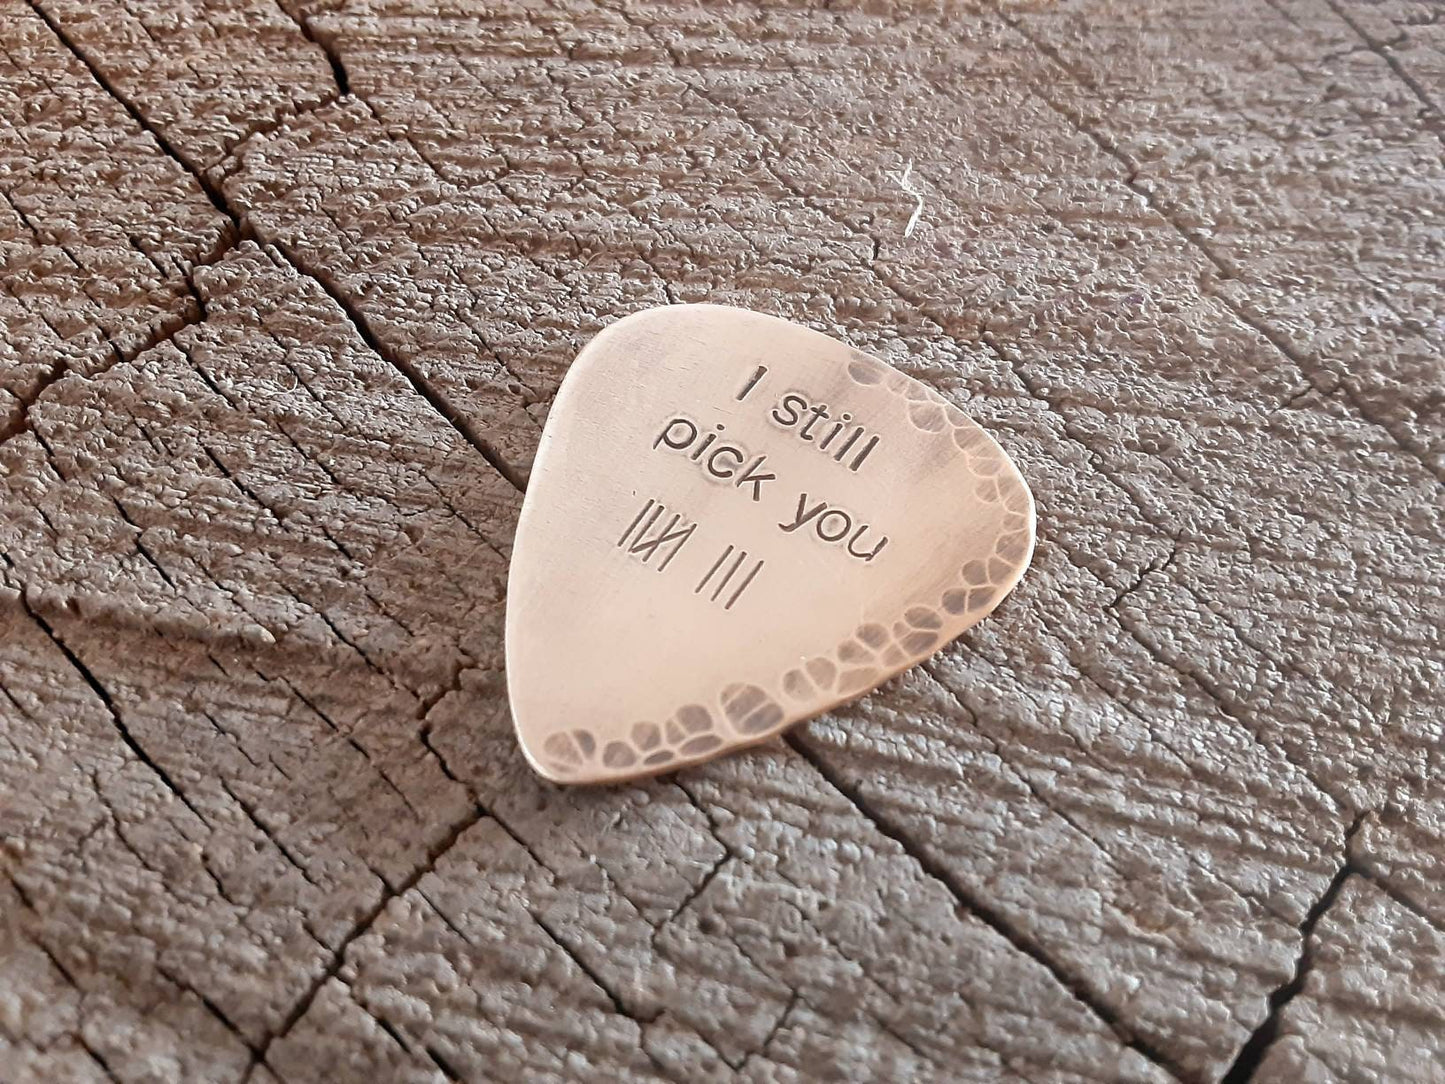 Playable guitar pick in bronze with tally marks for 8th anniversaries